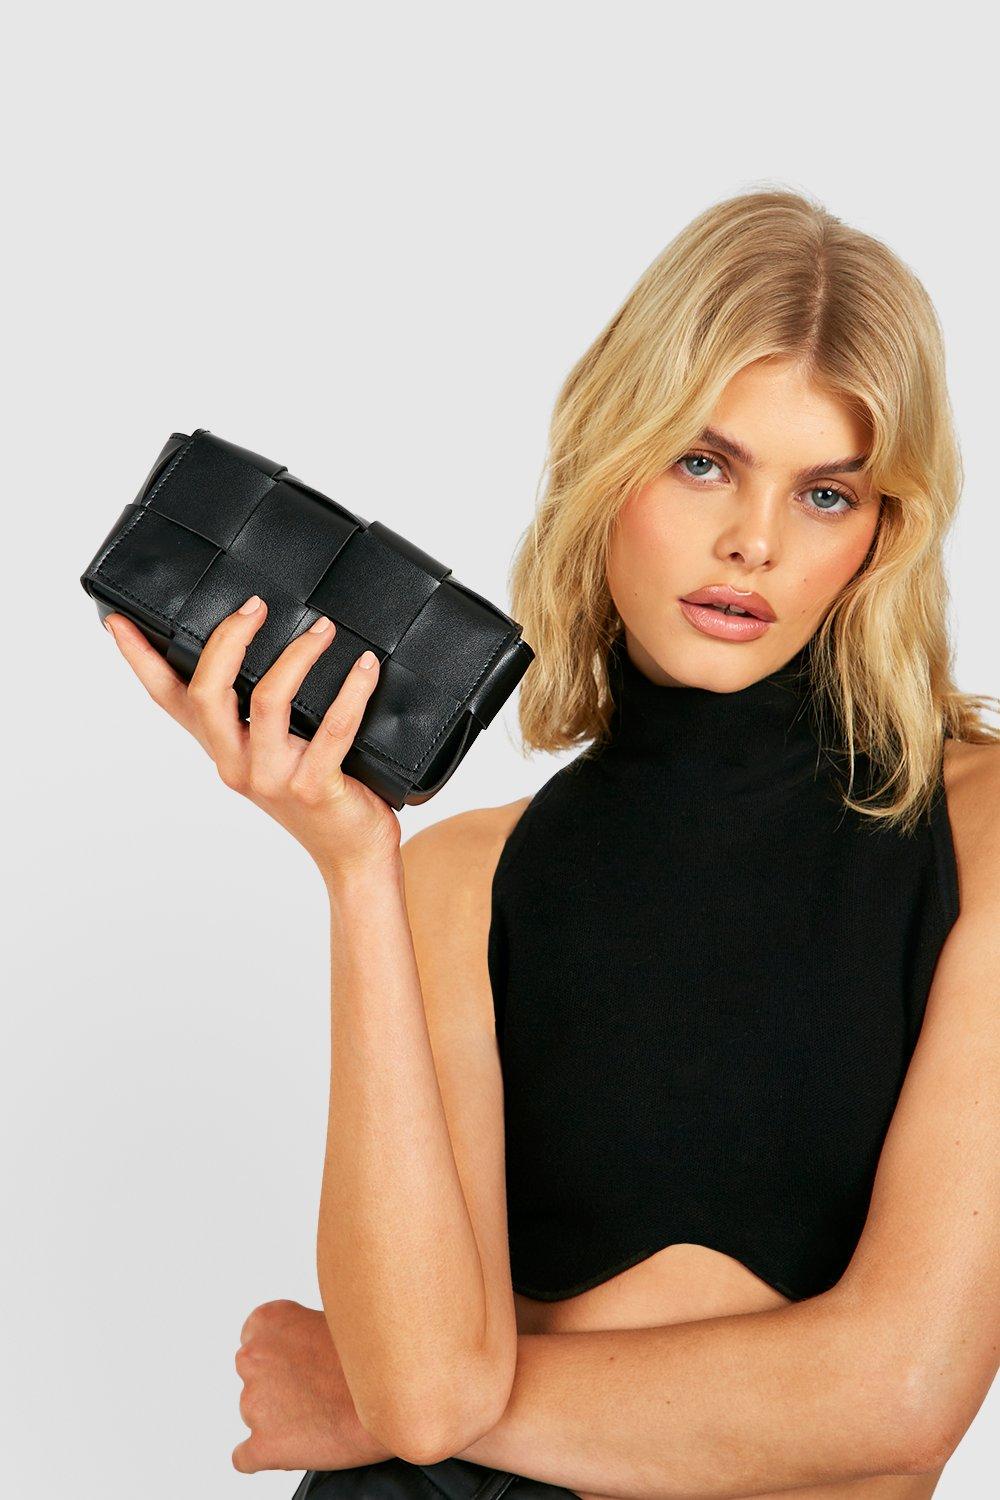 boohoo Faux Leather Belted Fanny Pack - Black - One Size